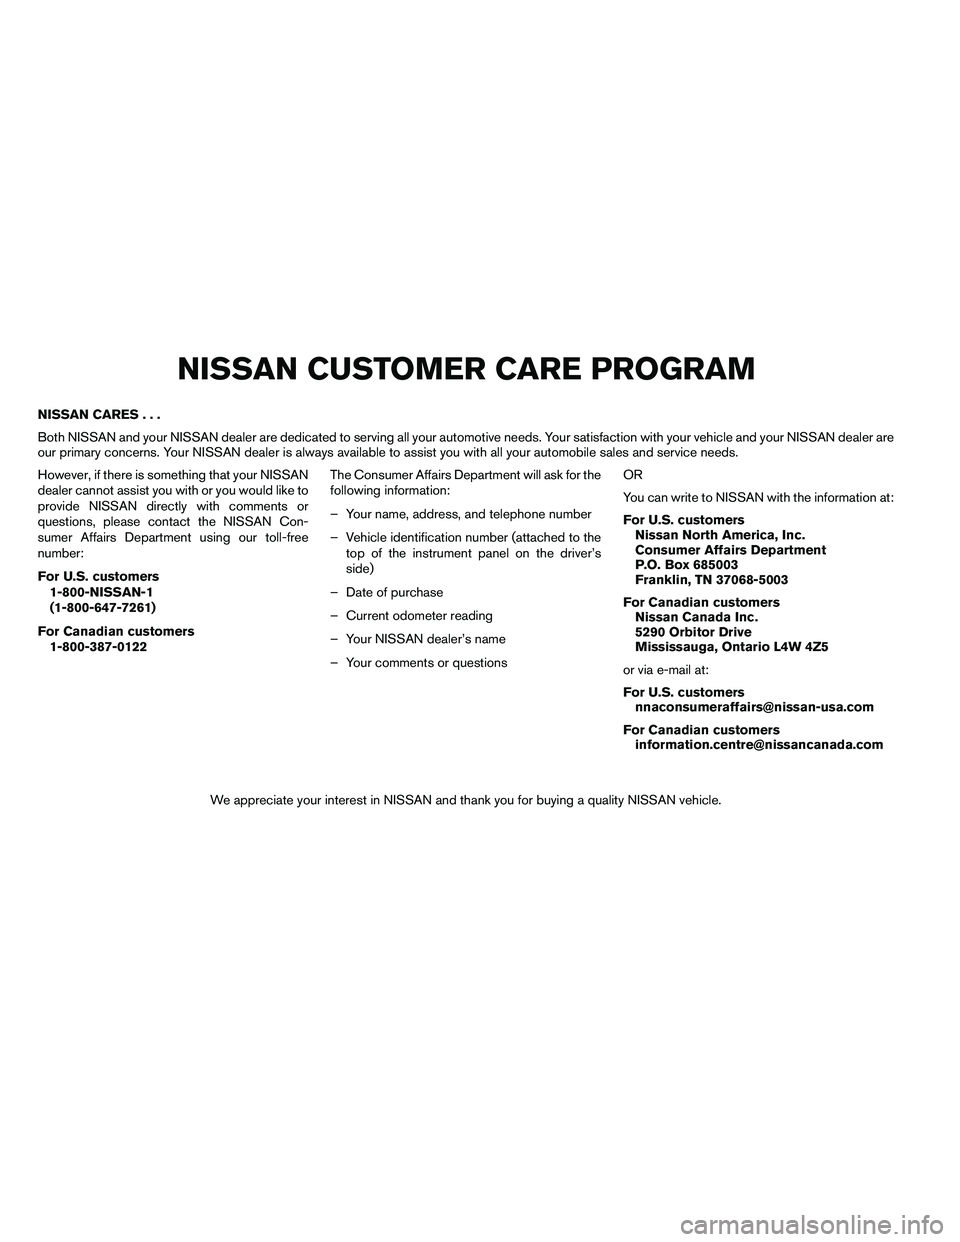 NISSAN ALTIMA 2012  Owners Manual NISSAN CARES...
Both NISSAN and your NISSAN dealer are dedicated to serving all your automotive needs. Your satisfaction with your vehicle and your NISSAN dealer are
our primary concerns. Your NISSAN 